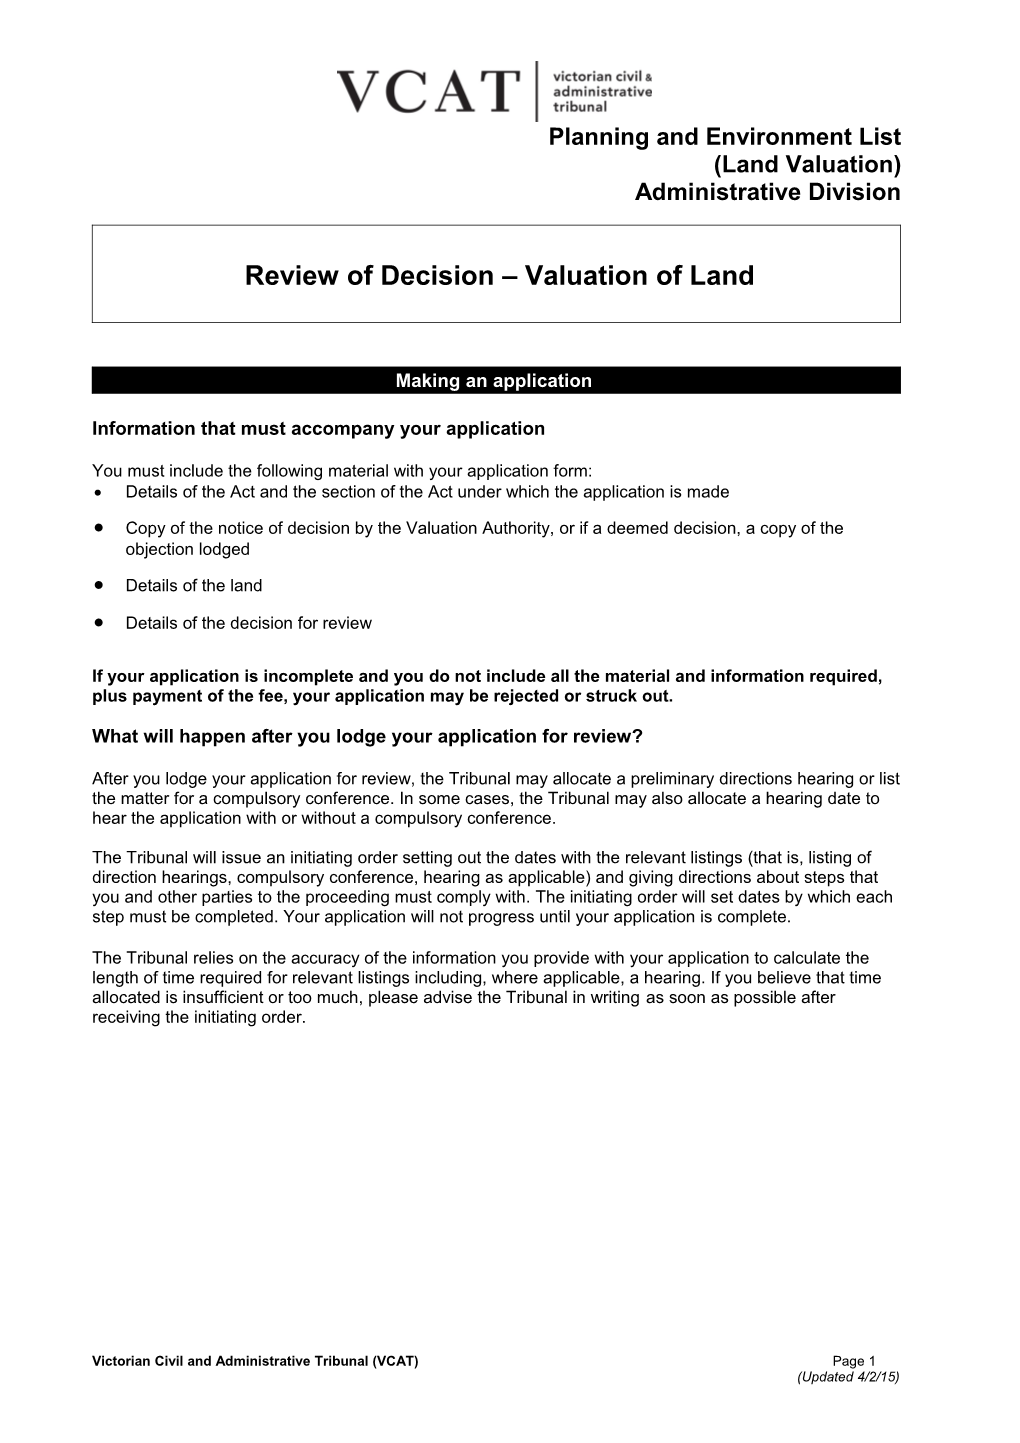 Application for Review of Decision - Valuation of Land